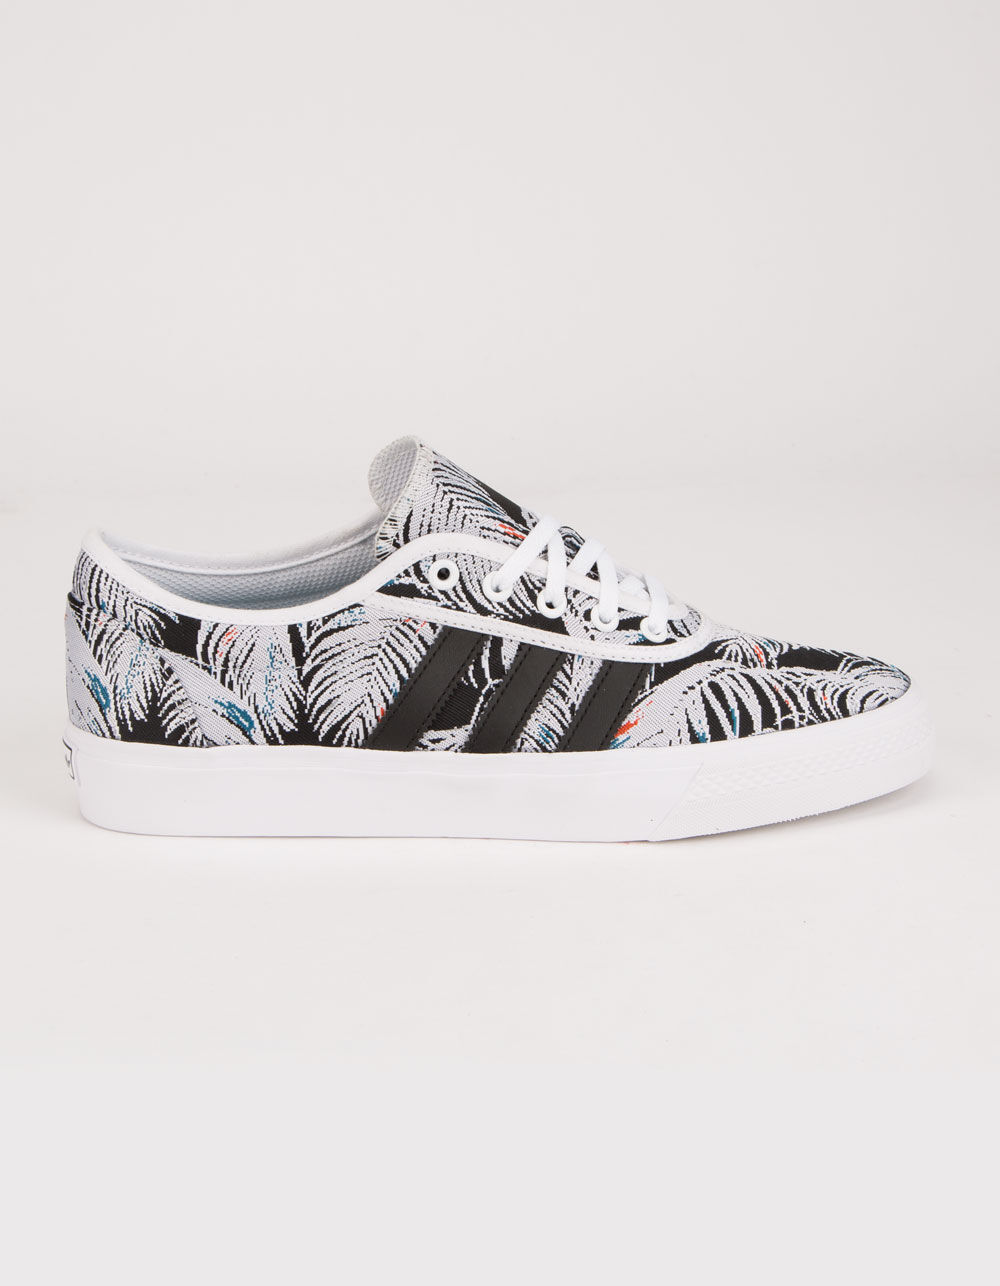 Adiease Cloud White & Shoes - CLOUD WHITE/CORE BLACK/ACTIVE TEAL | Tillys